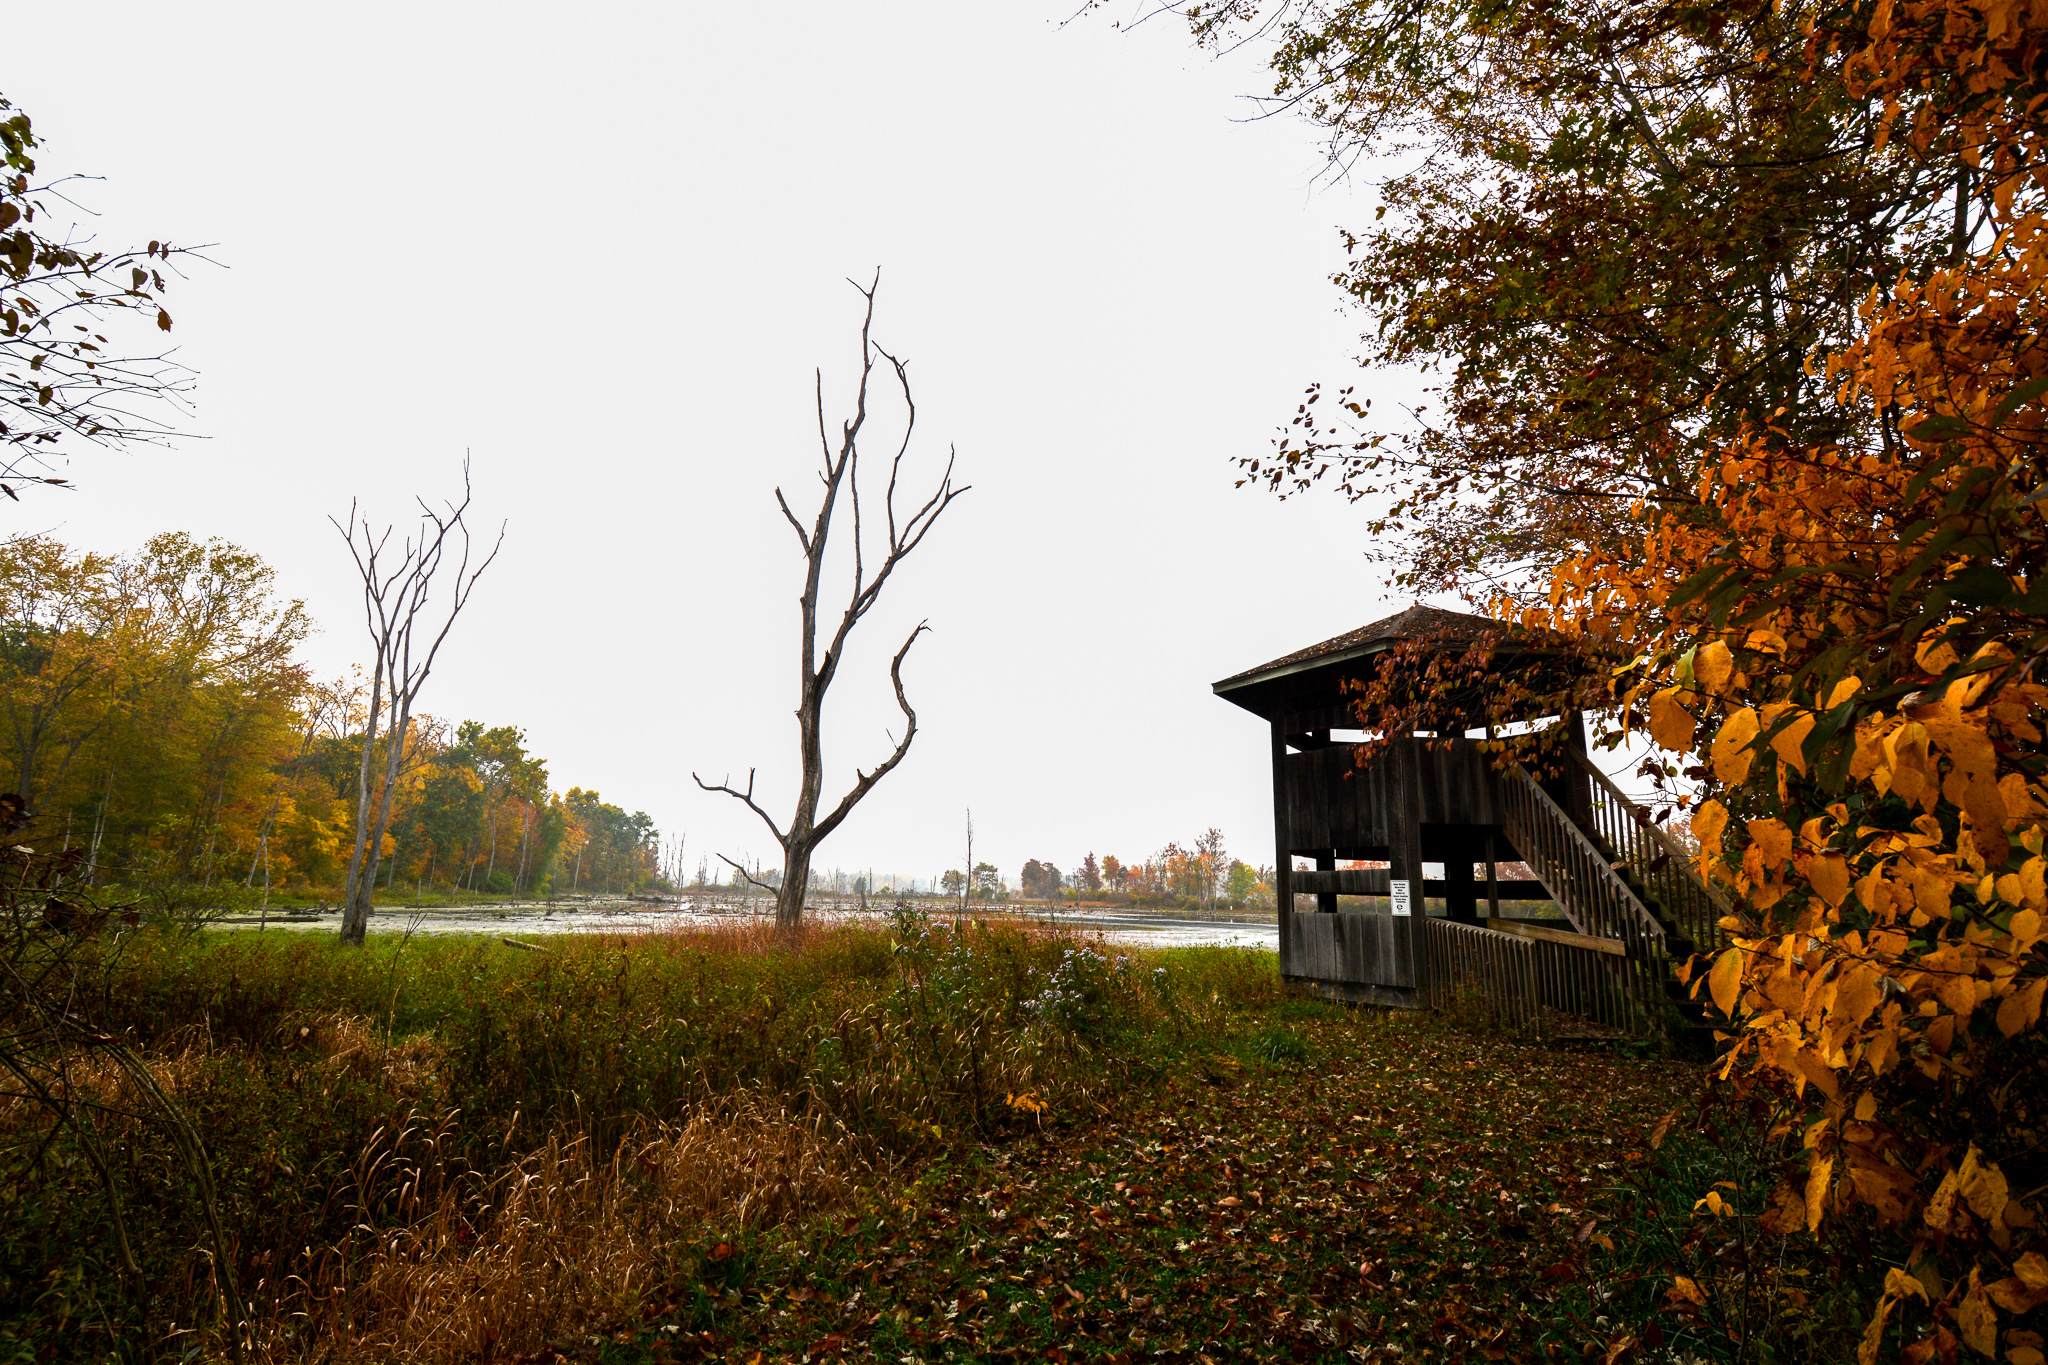 The observation tower overlooking the now restored Onion Bottom wetland in fall. Photo by Elena Fischer / Merry Lea